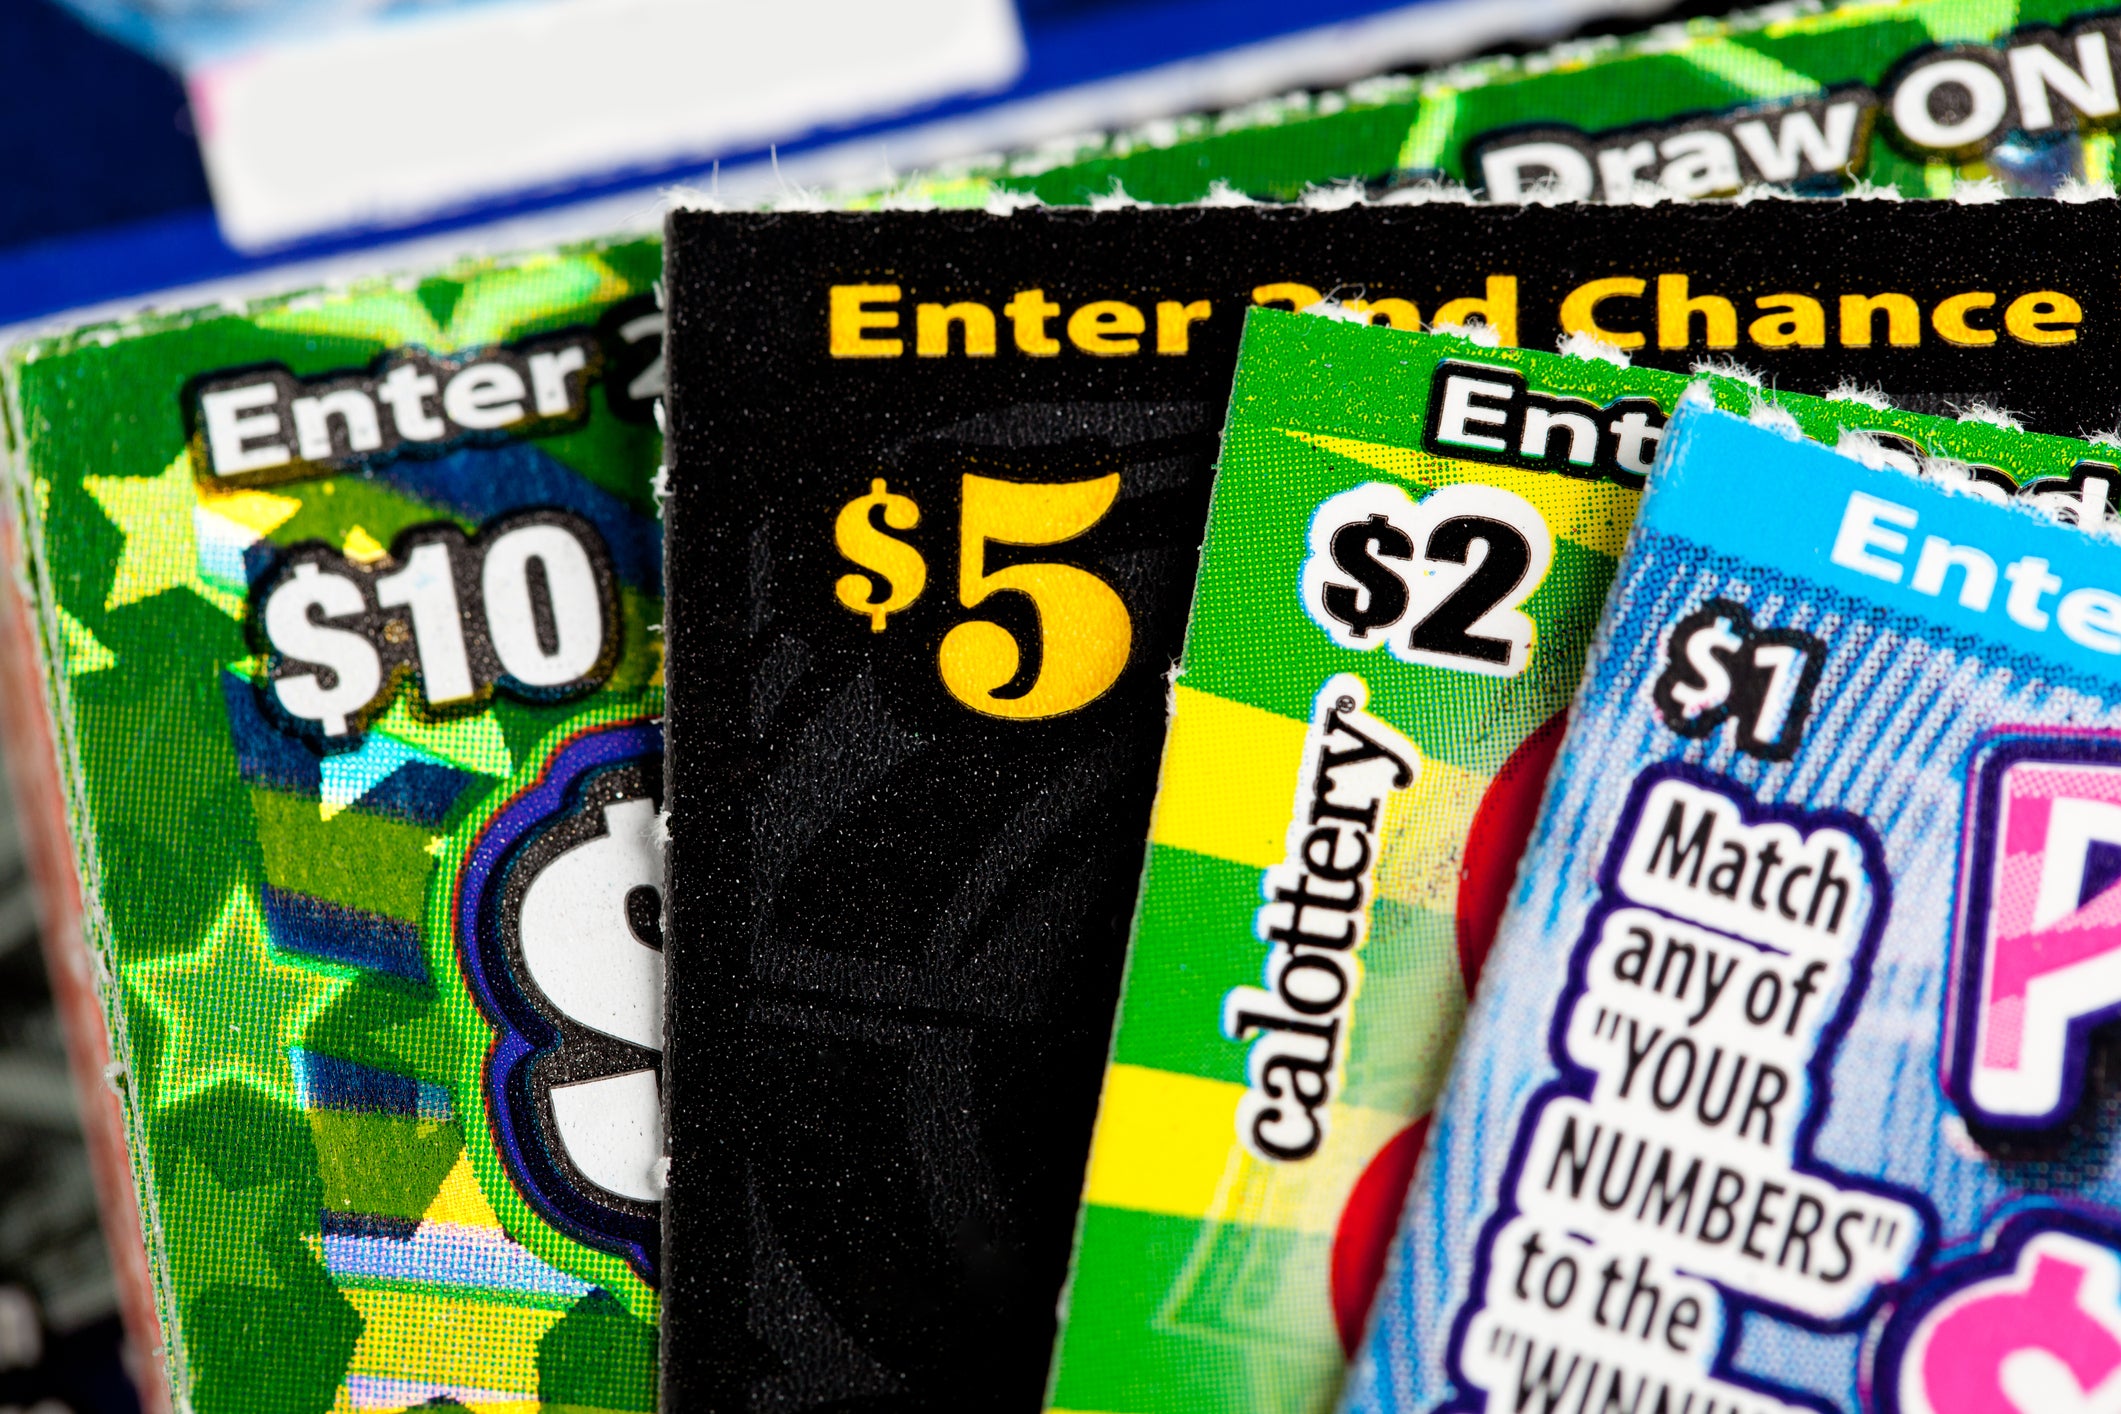 Woman who was formerly homeless wins $5m in lottery scratch-off ticket